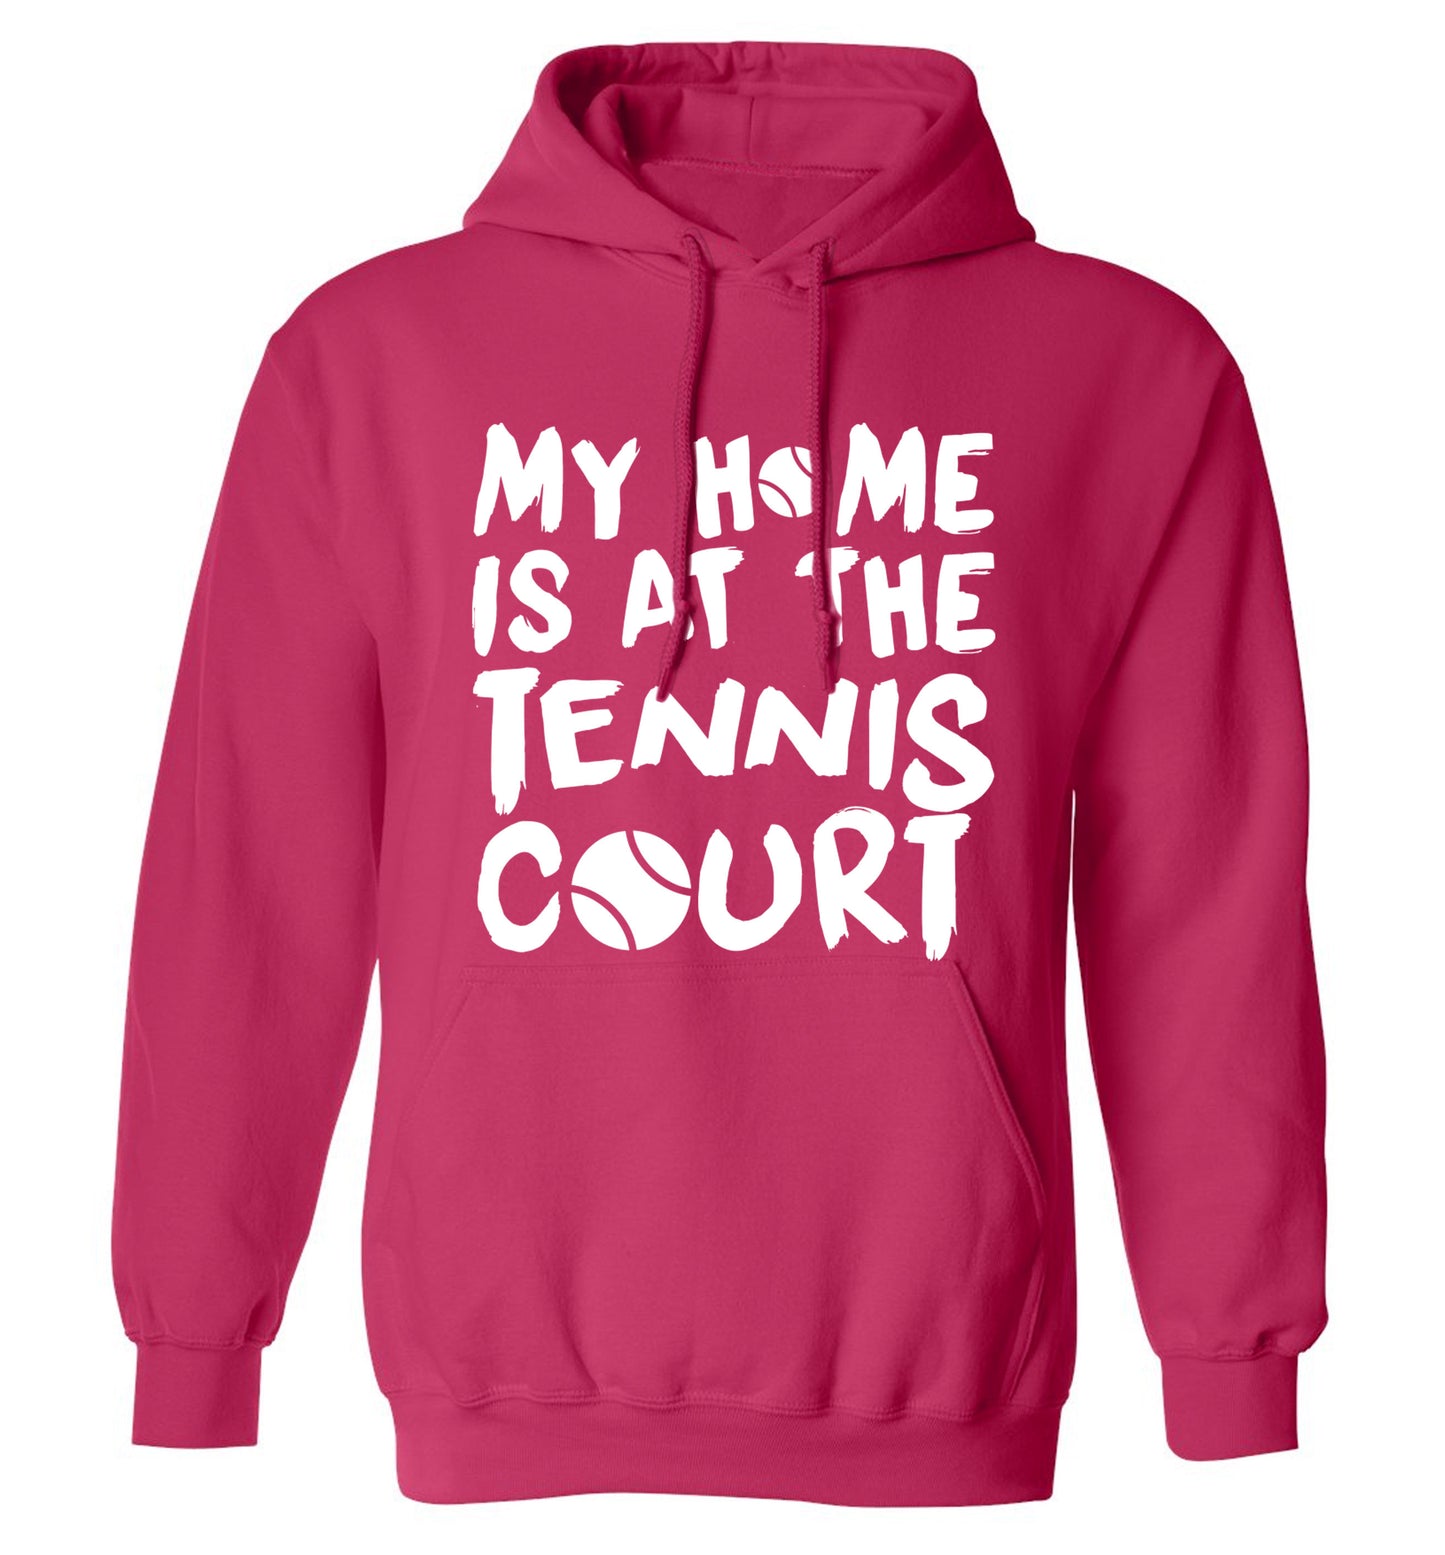 My home is at the tennis court adults unisex pink hoodie 2XL